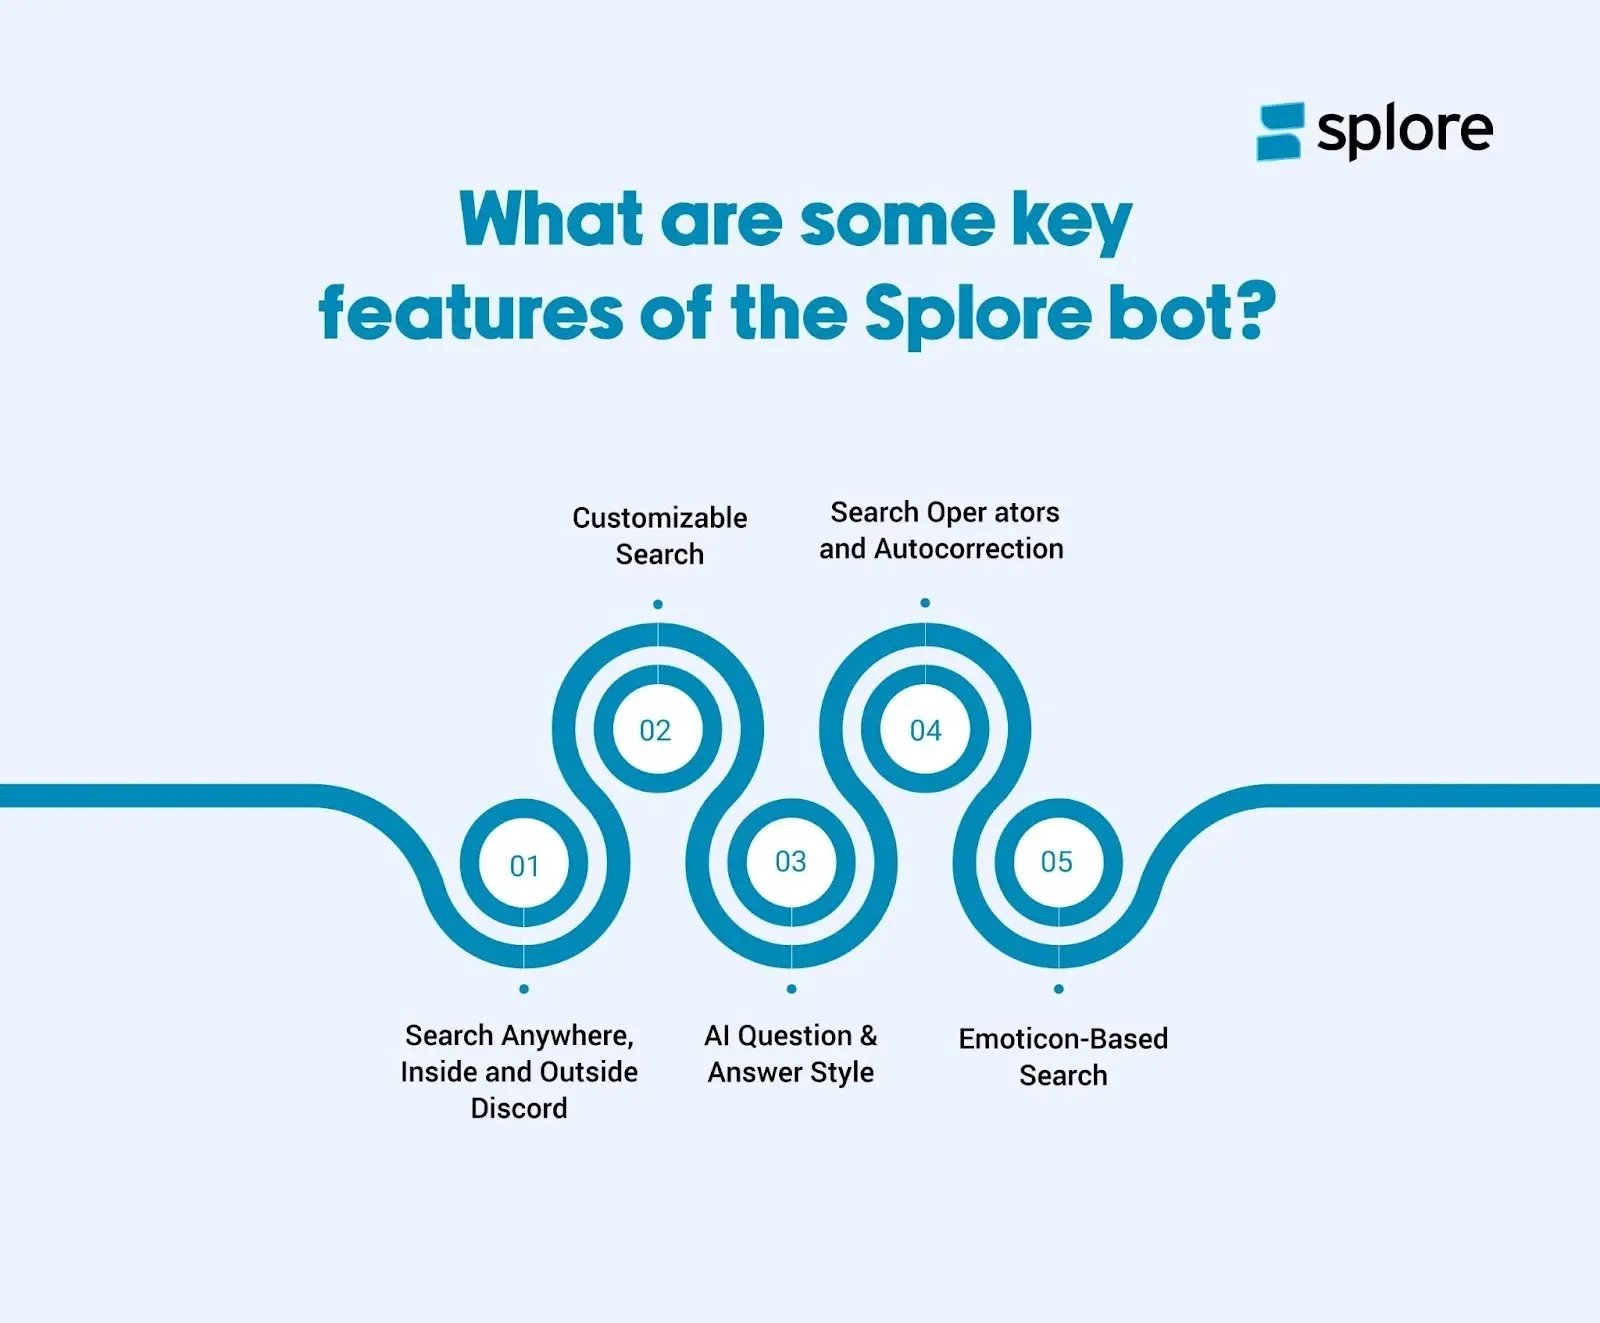 What are some key features of thw Splore bot